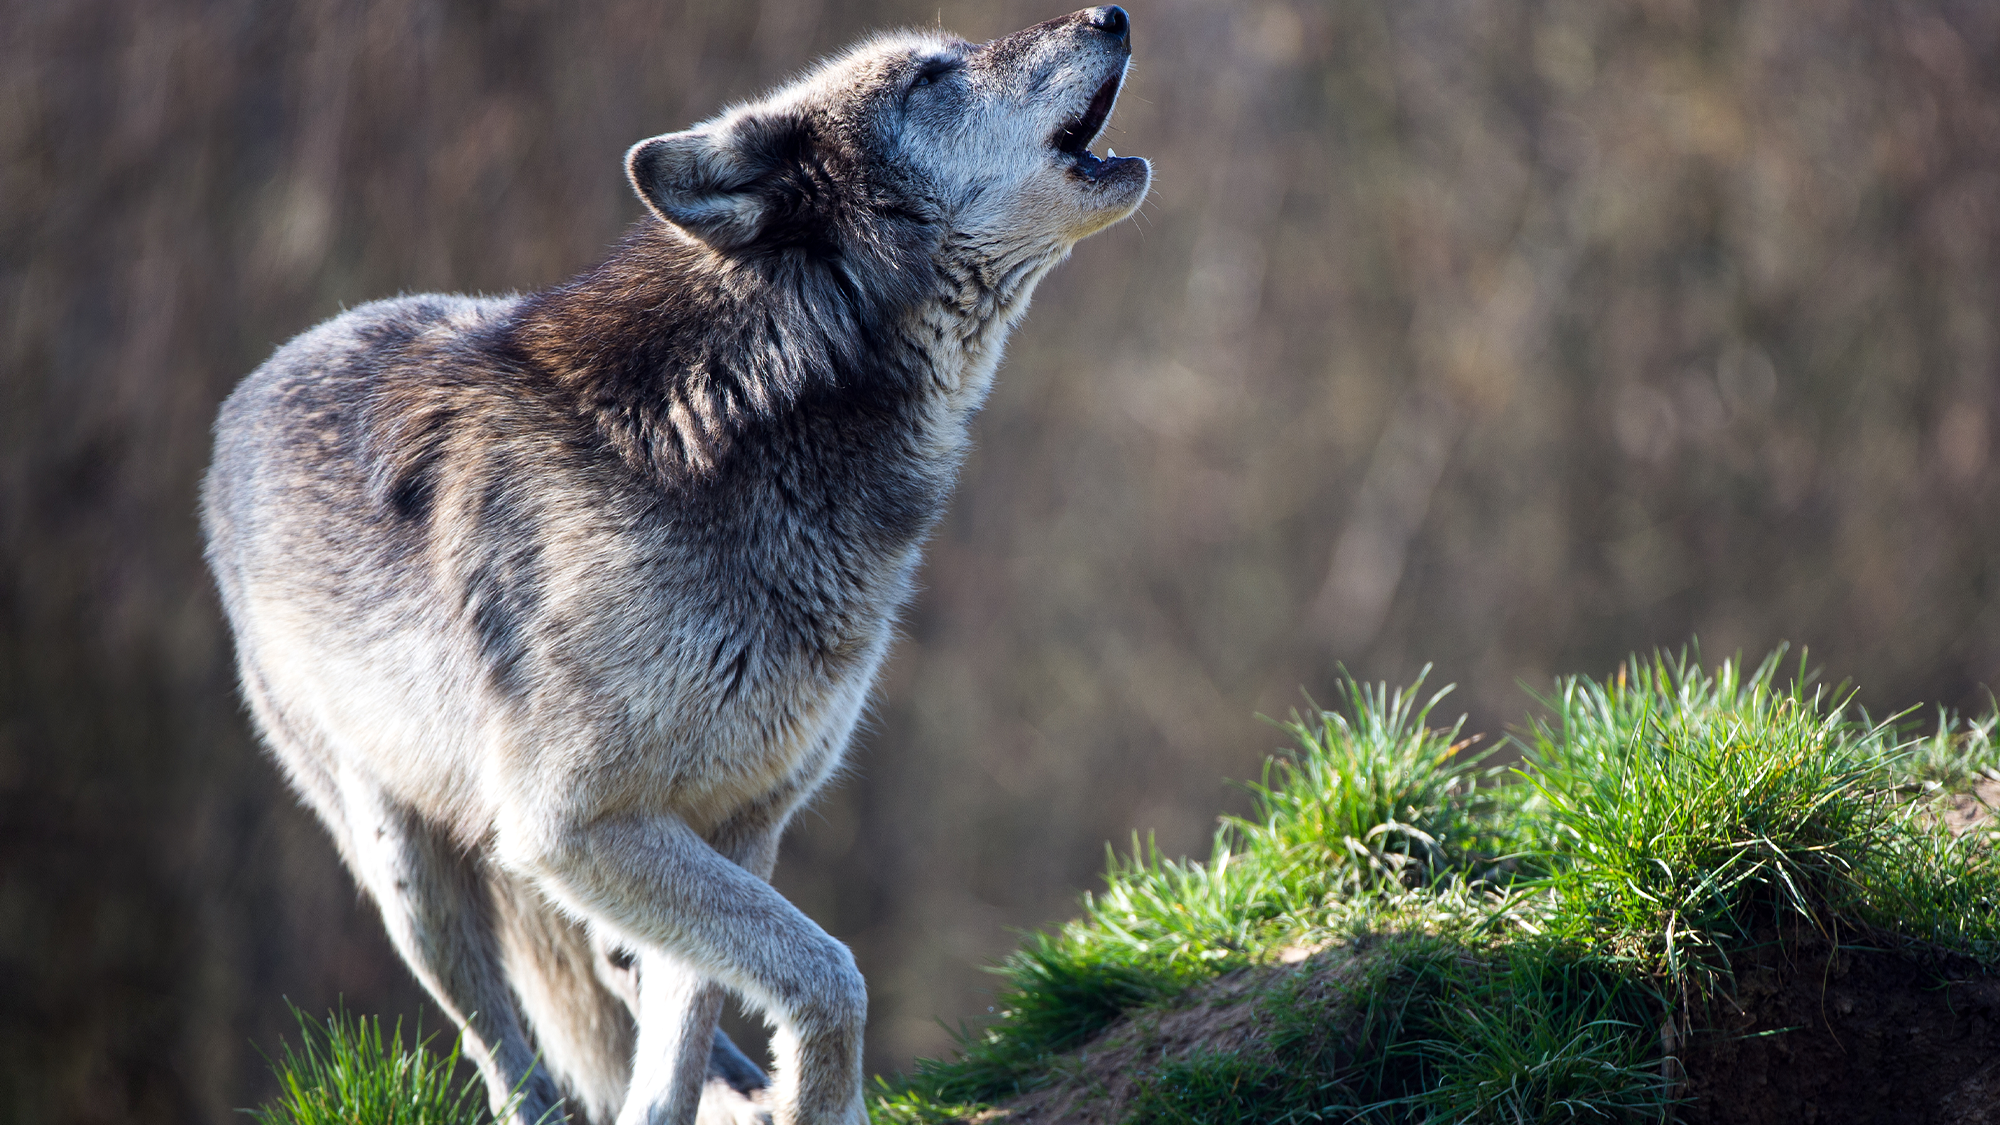 A new pack of endangered gray wolves is roaming Northern California